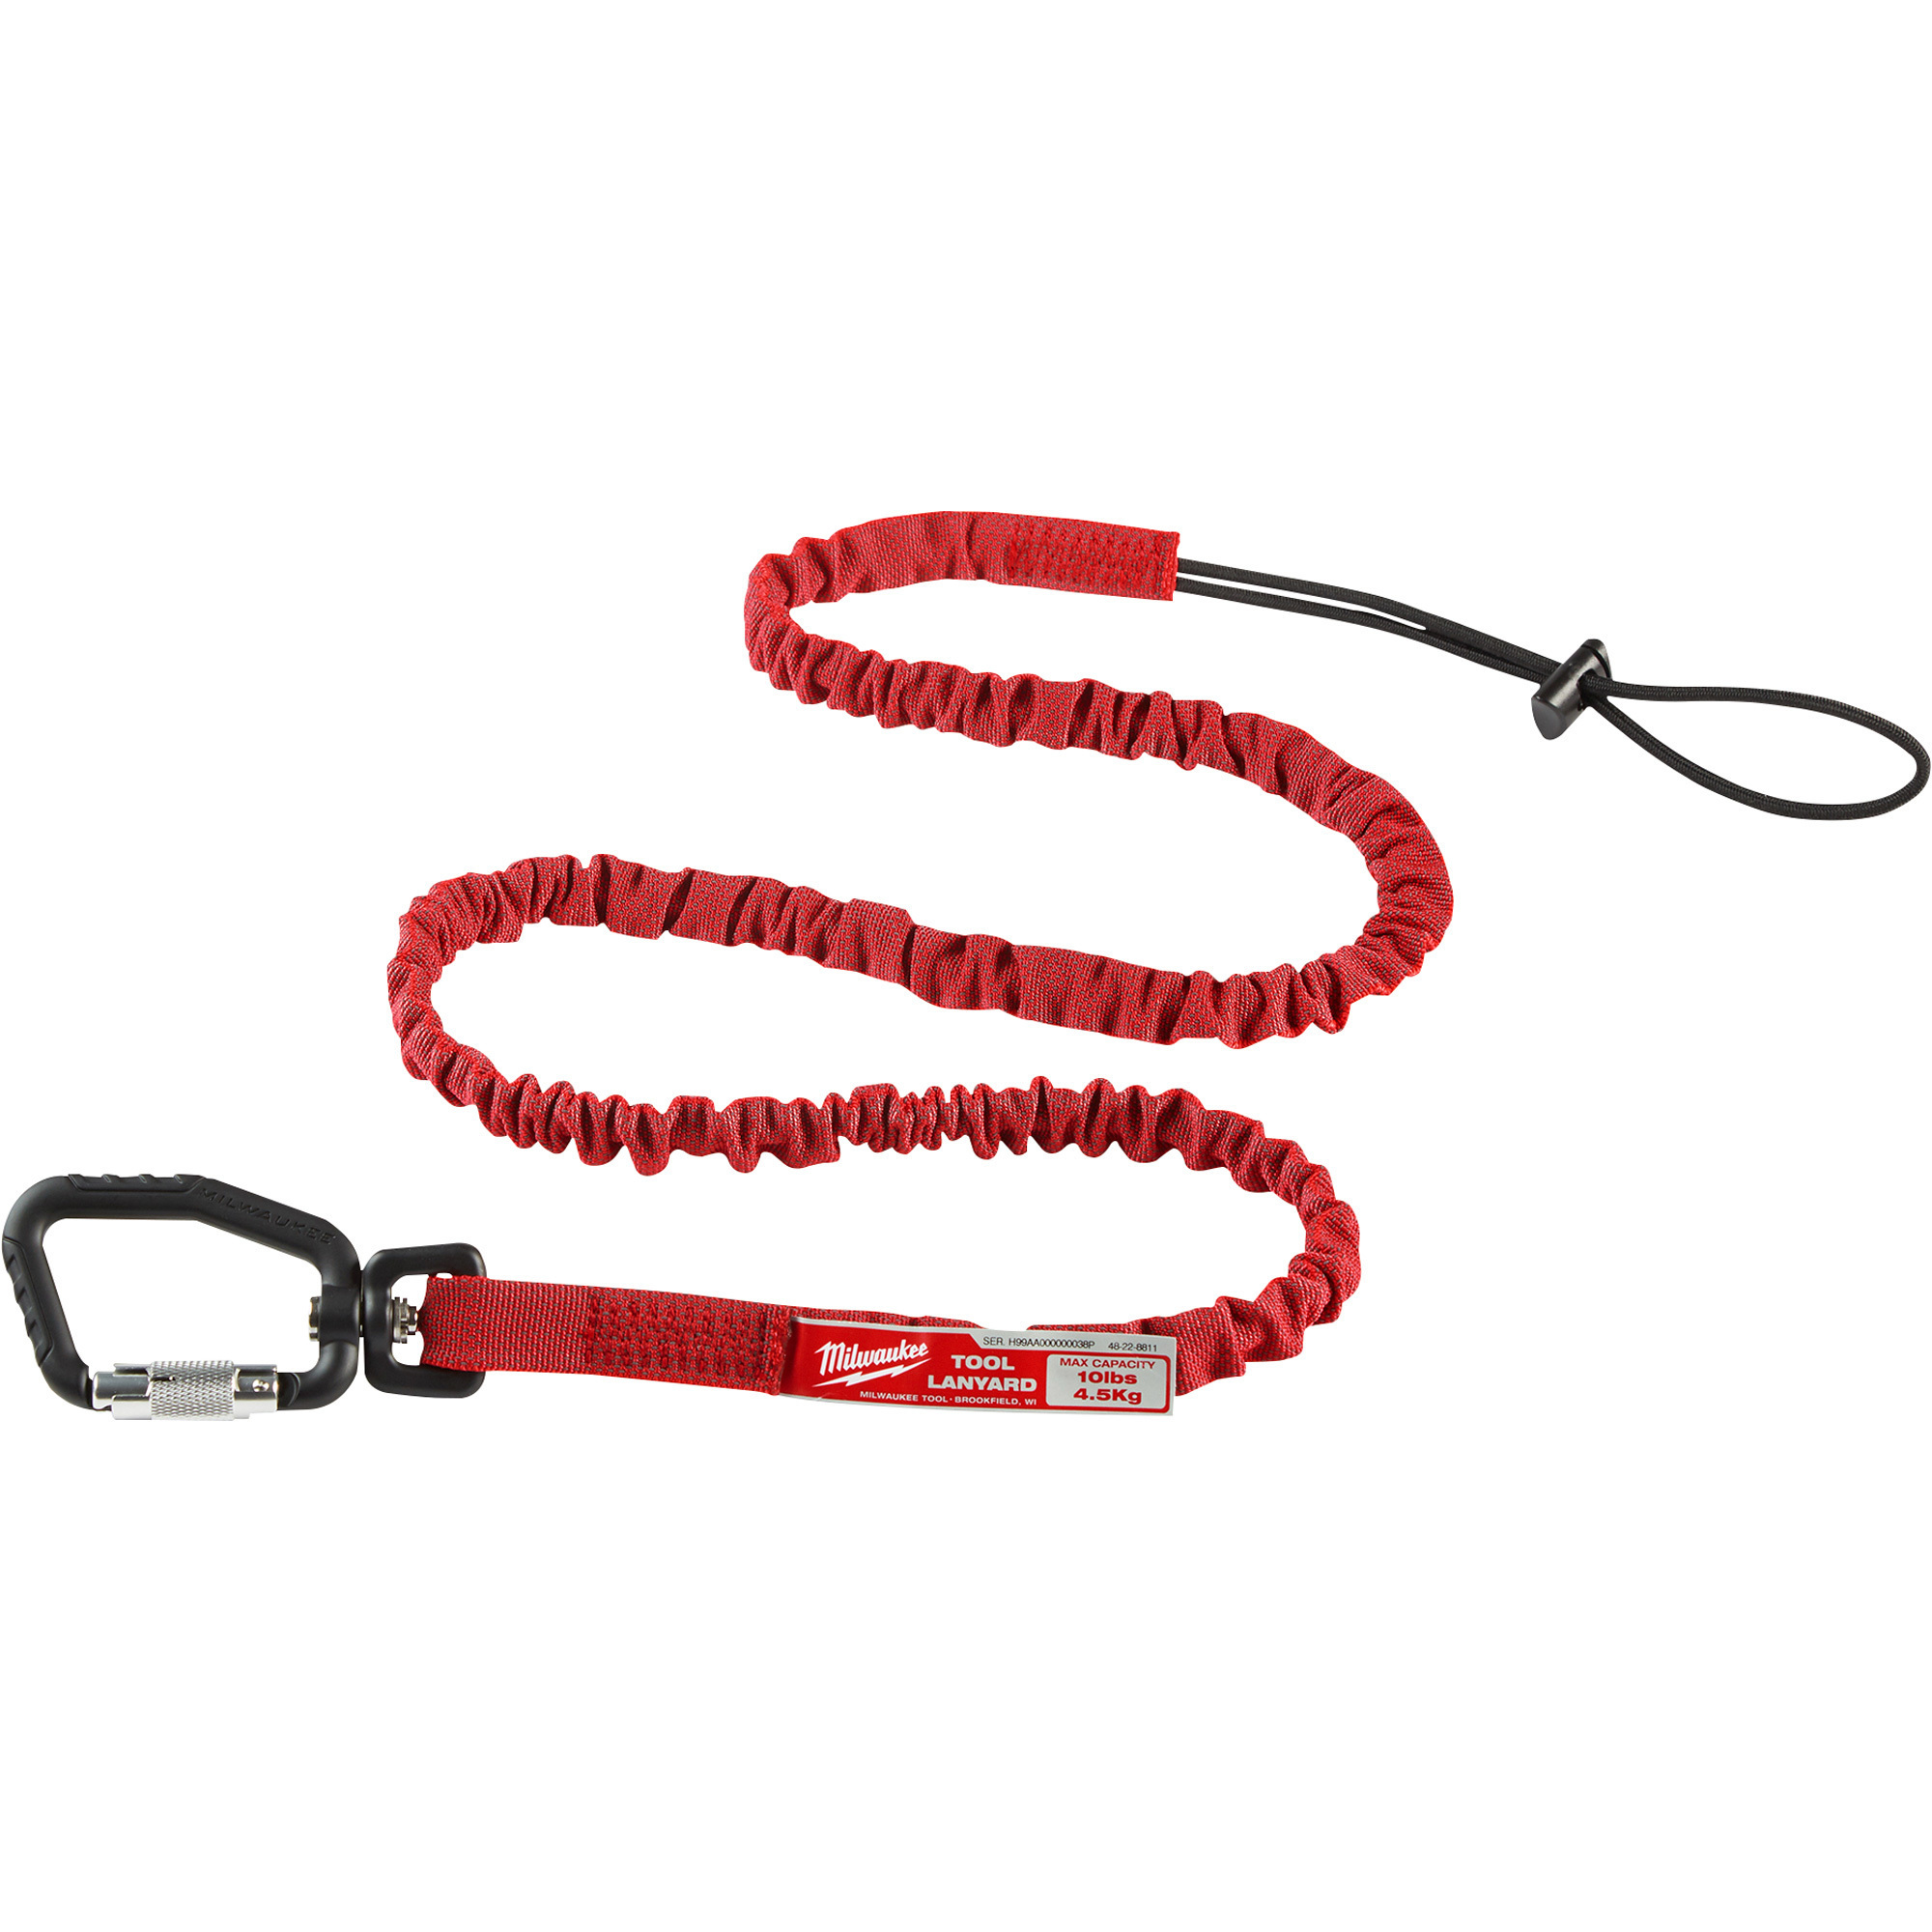 Milwaukee 54Inch Extended Reach Locking Tool Lanyard, 10-Lb. Working Load, Model 48-22-8811